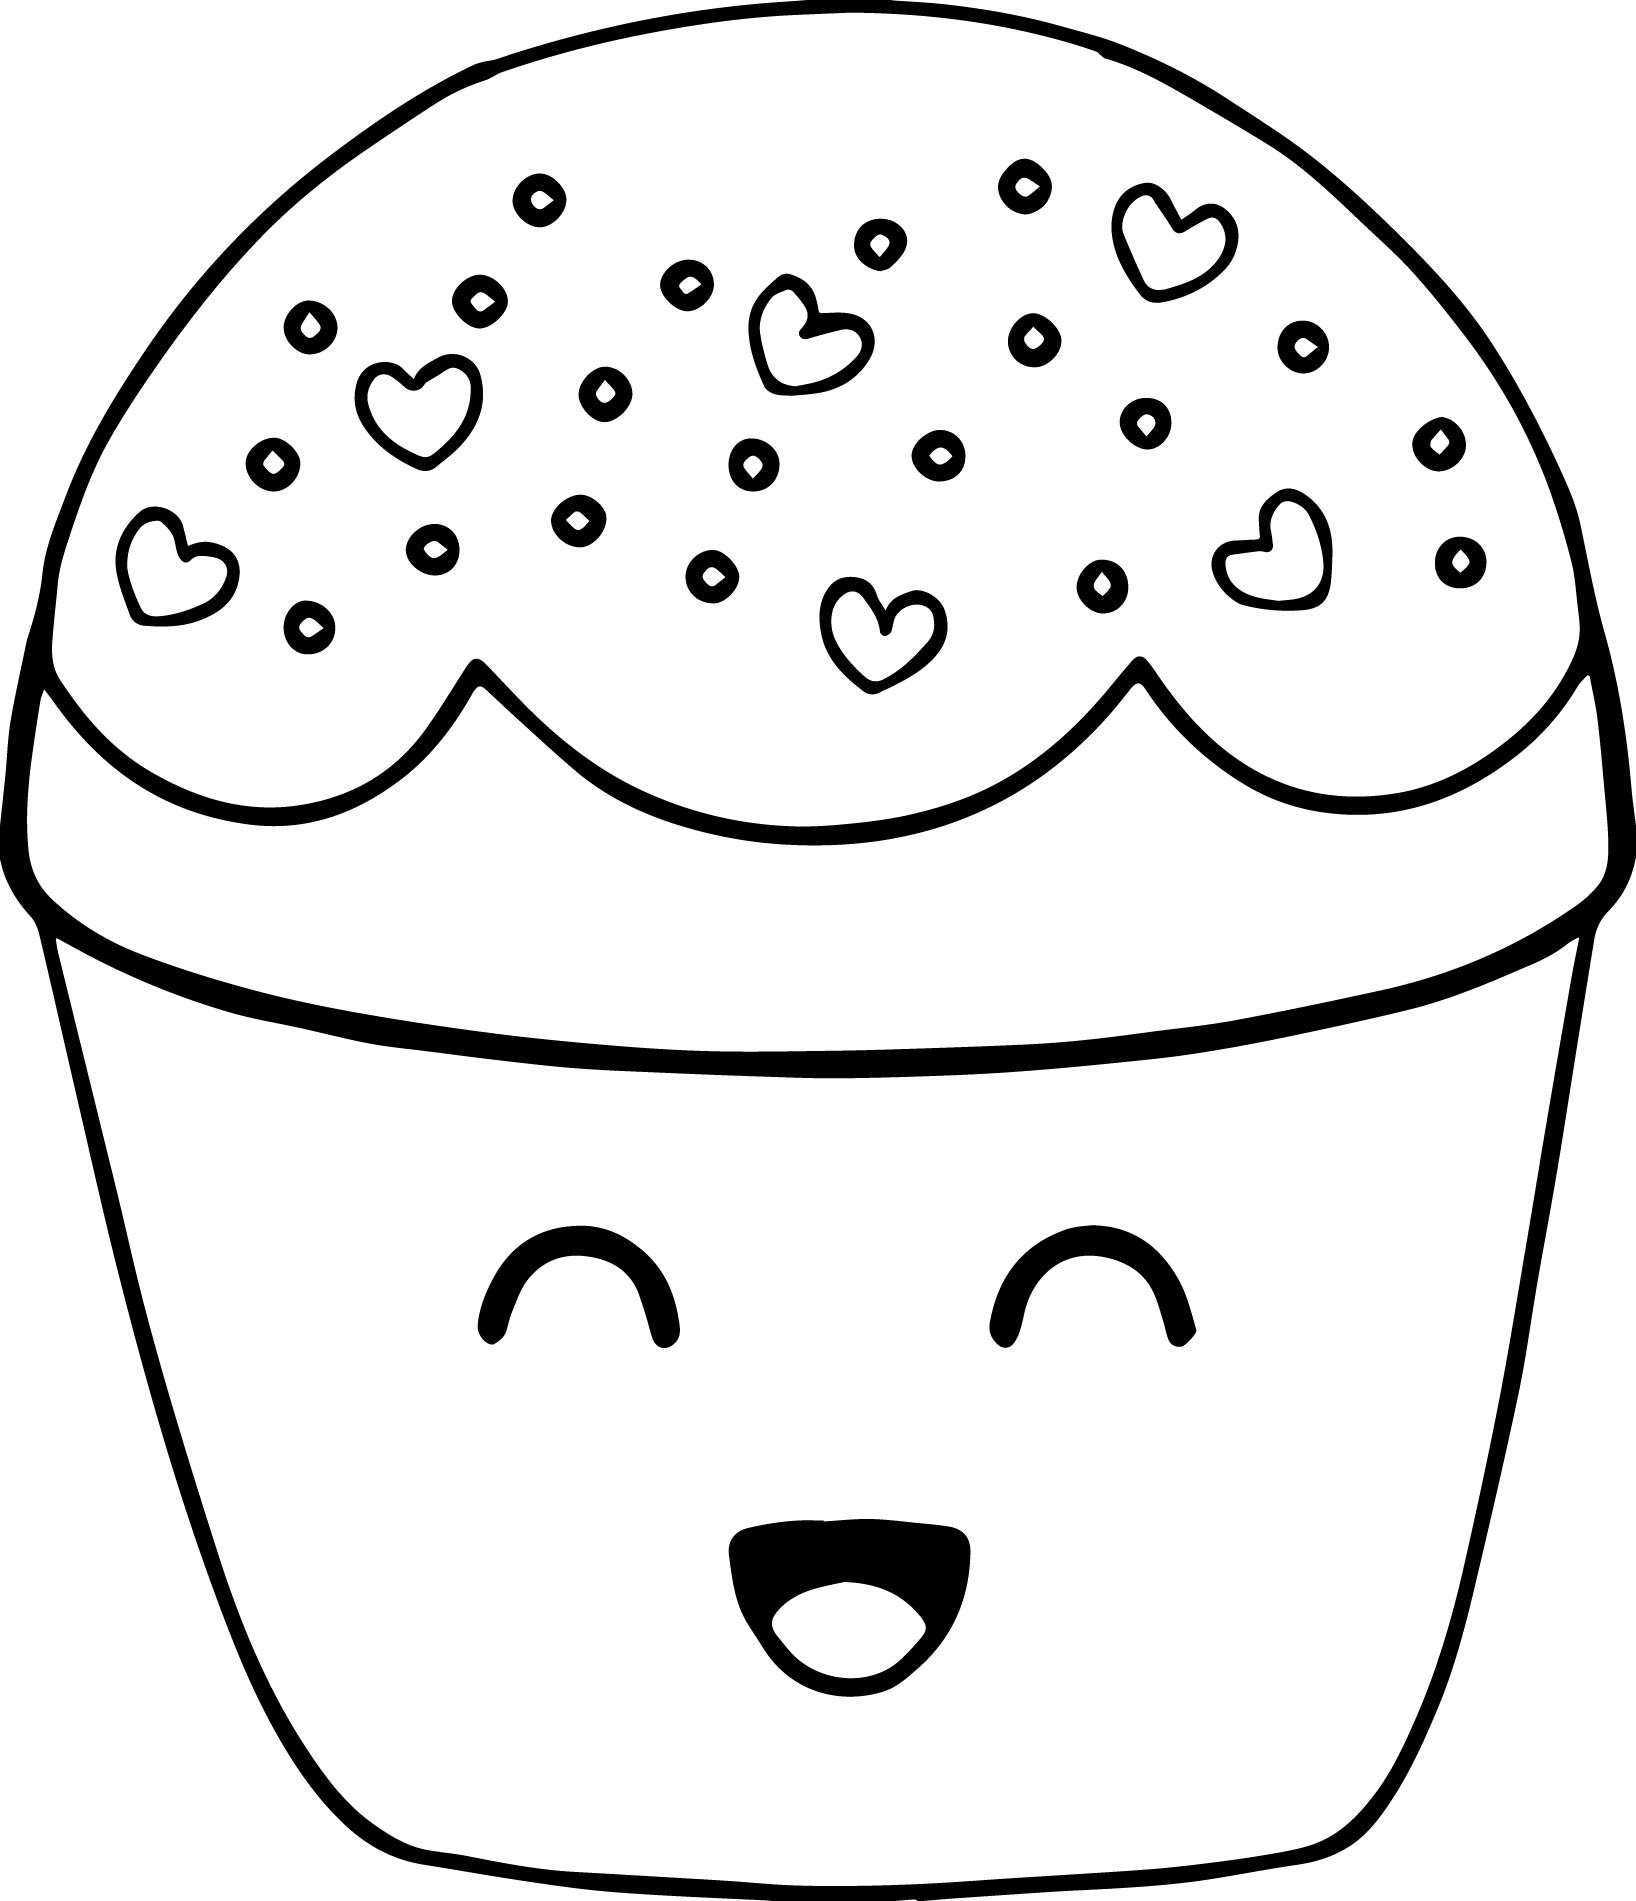 Cute Cupcake Coloring Pages at GetDrawings.com | Free for personal use